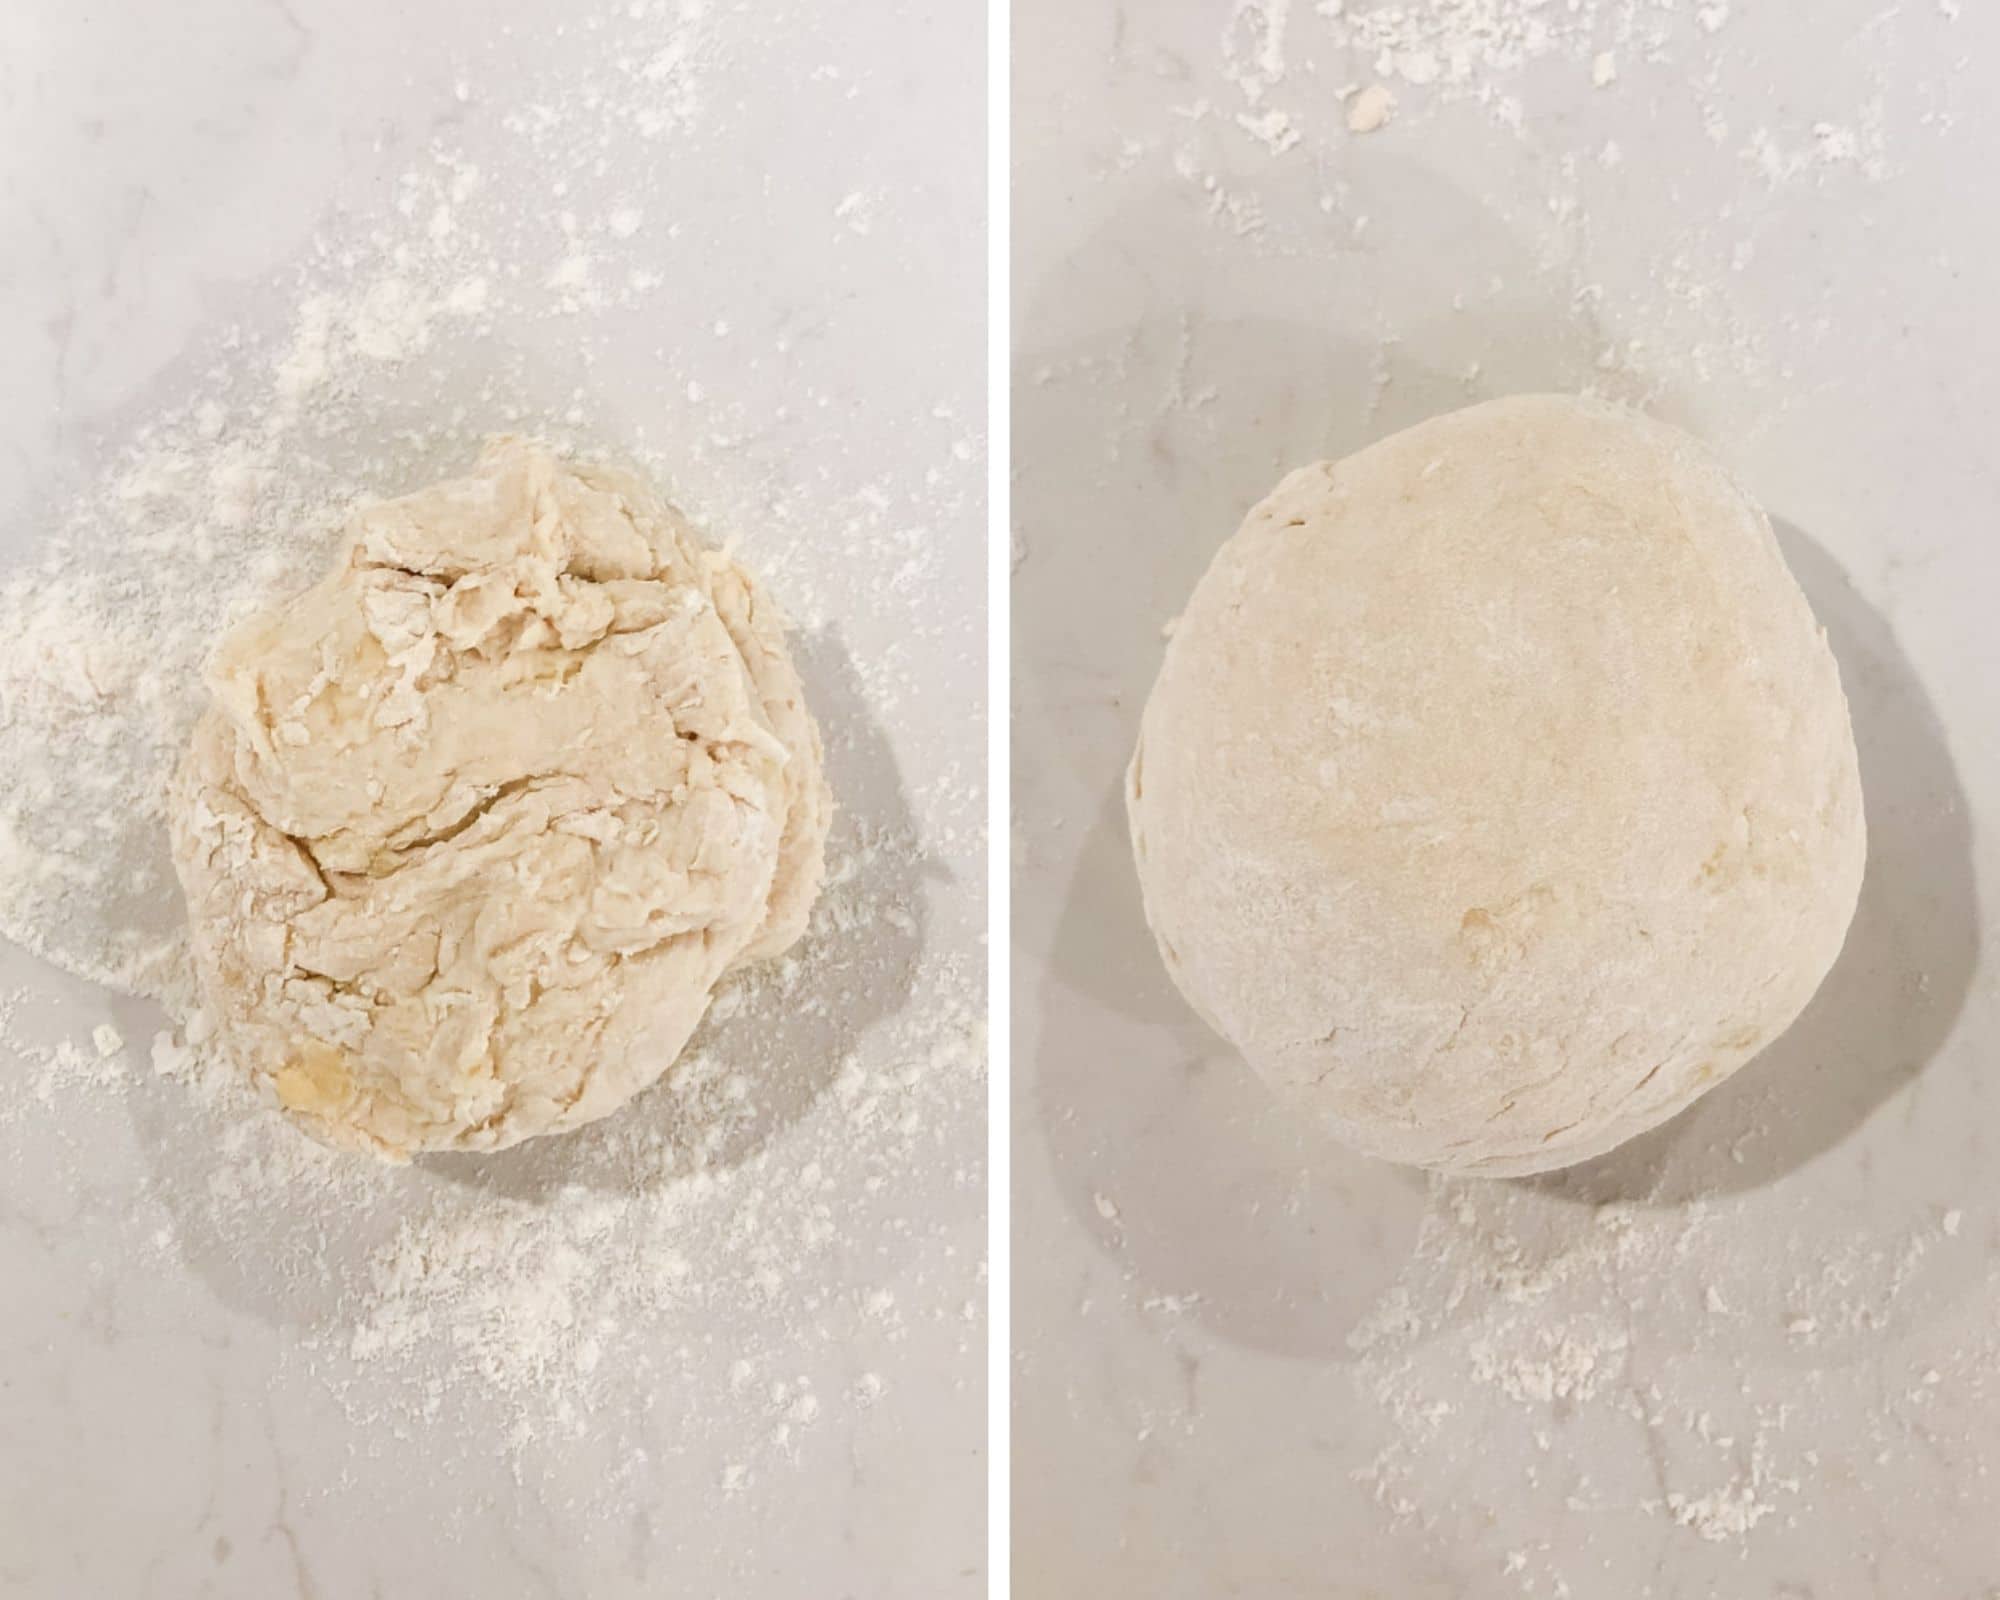 Dough before and after kneading it